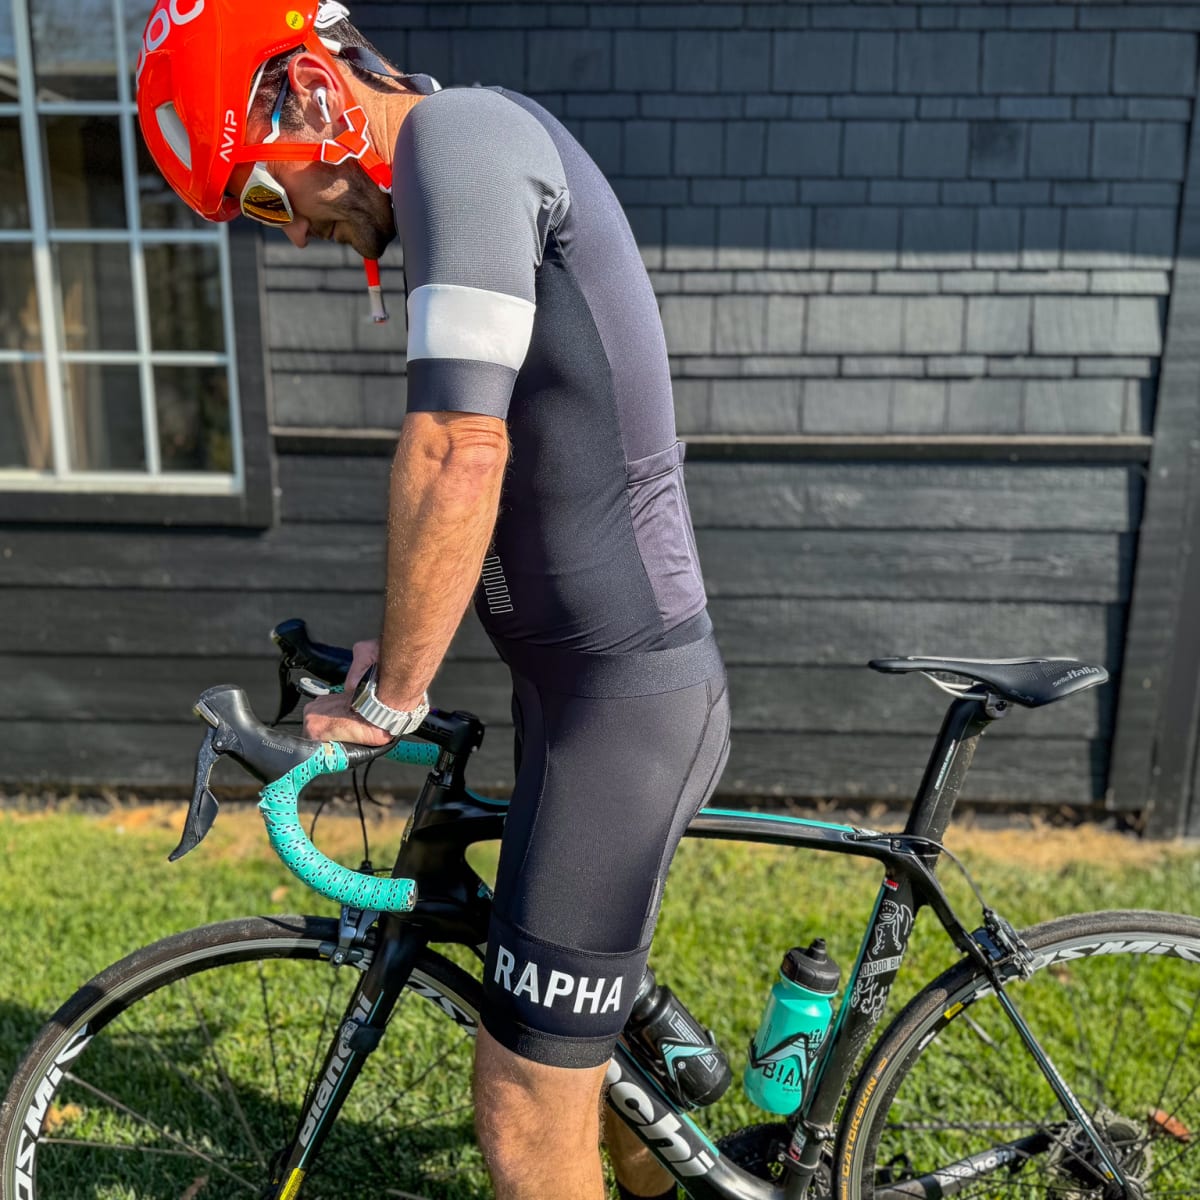 Rapha Pro Team Training bib tights review: Lightweight comfort and style